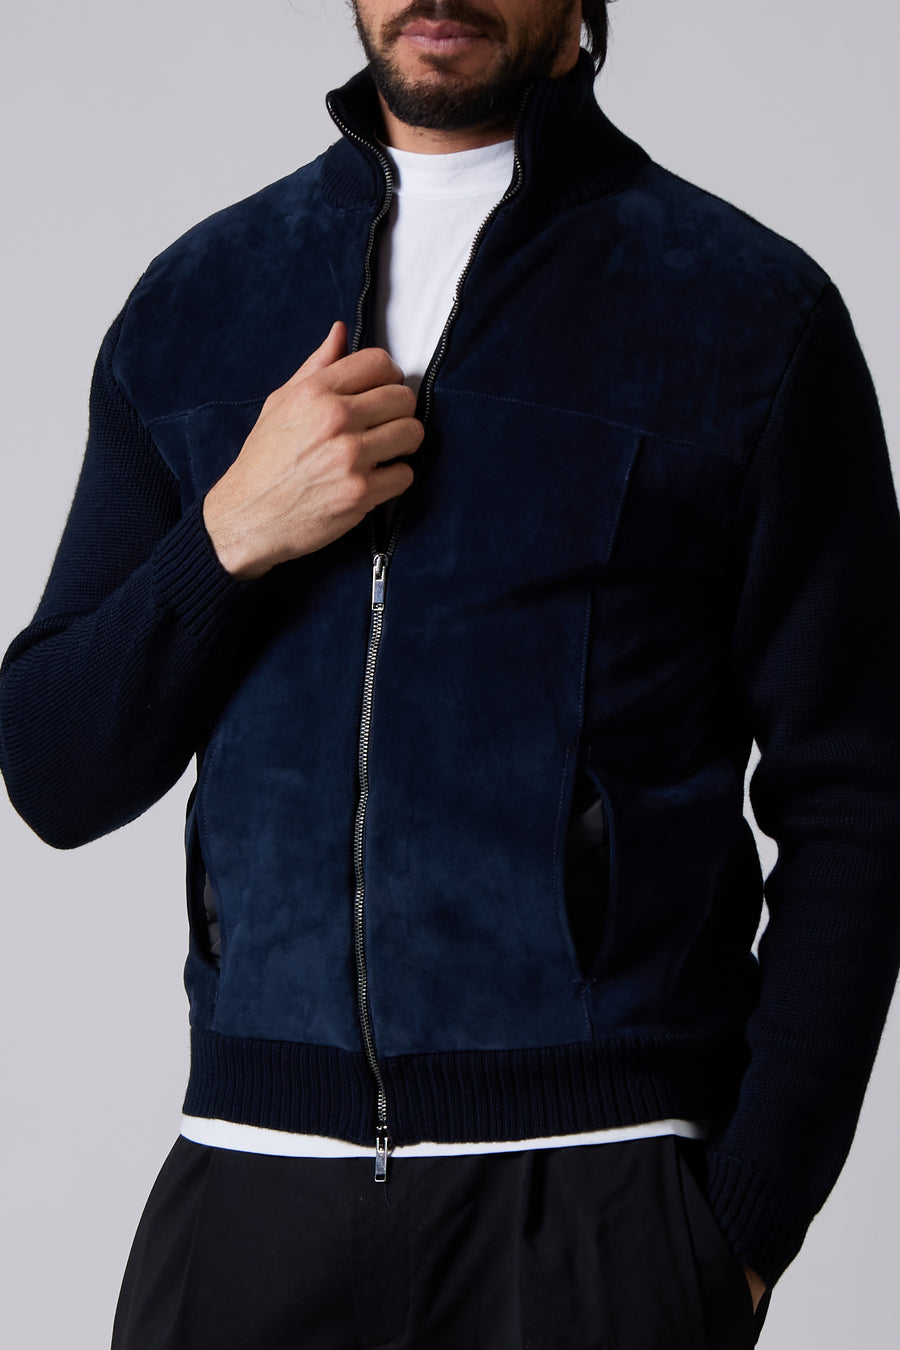 Buy the Daniele Fiesoli Zip-Up Knitted Suede Bomber Blue at Intro. Spend £50 for free UK delivery. Official stockists. We ship worldwide.